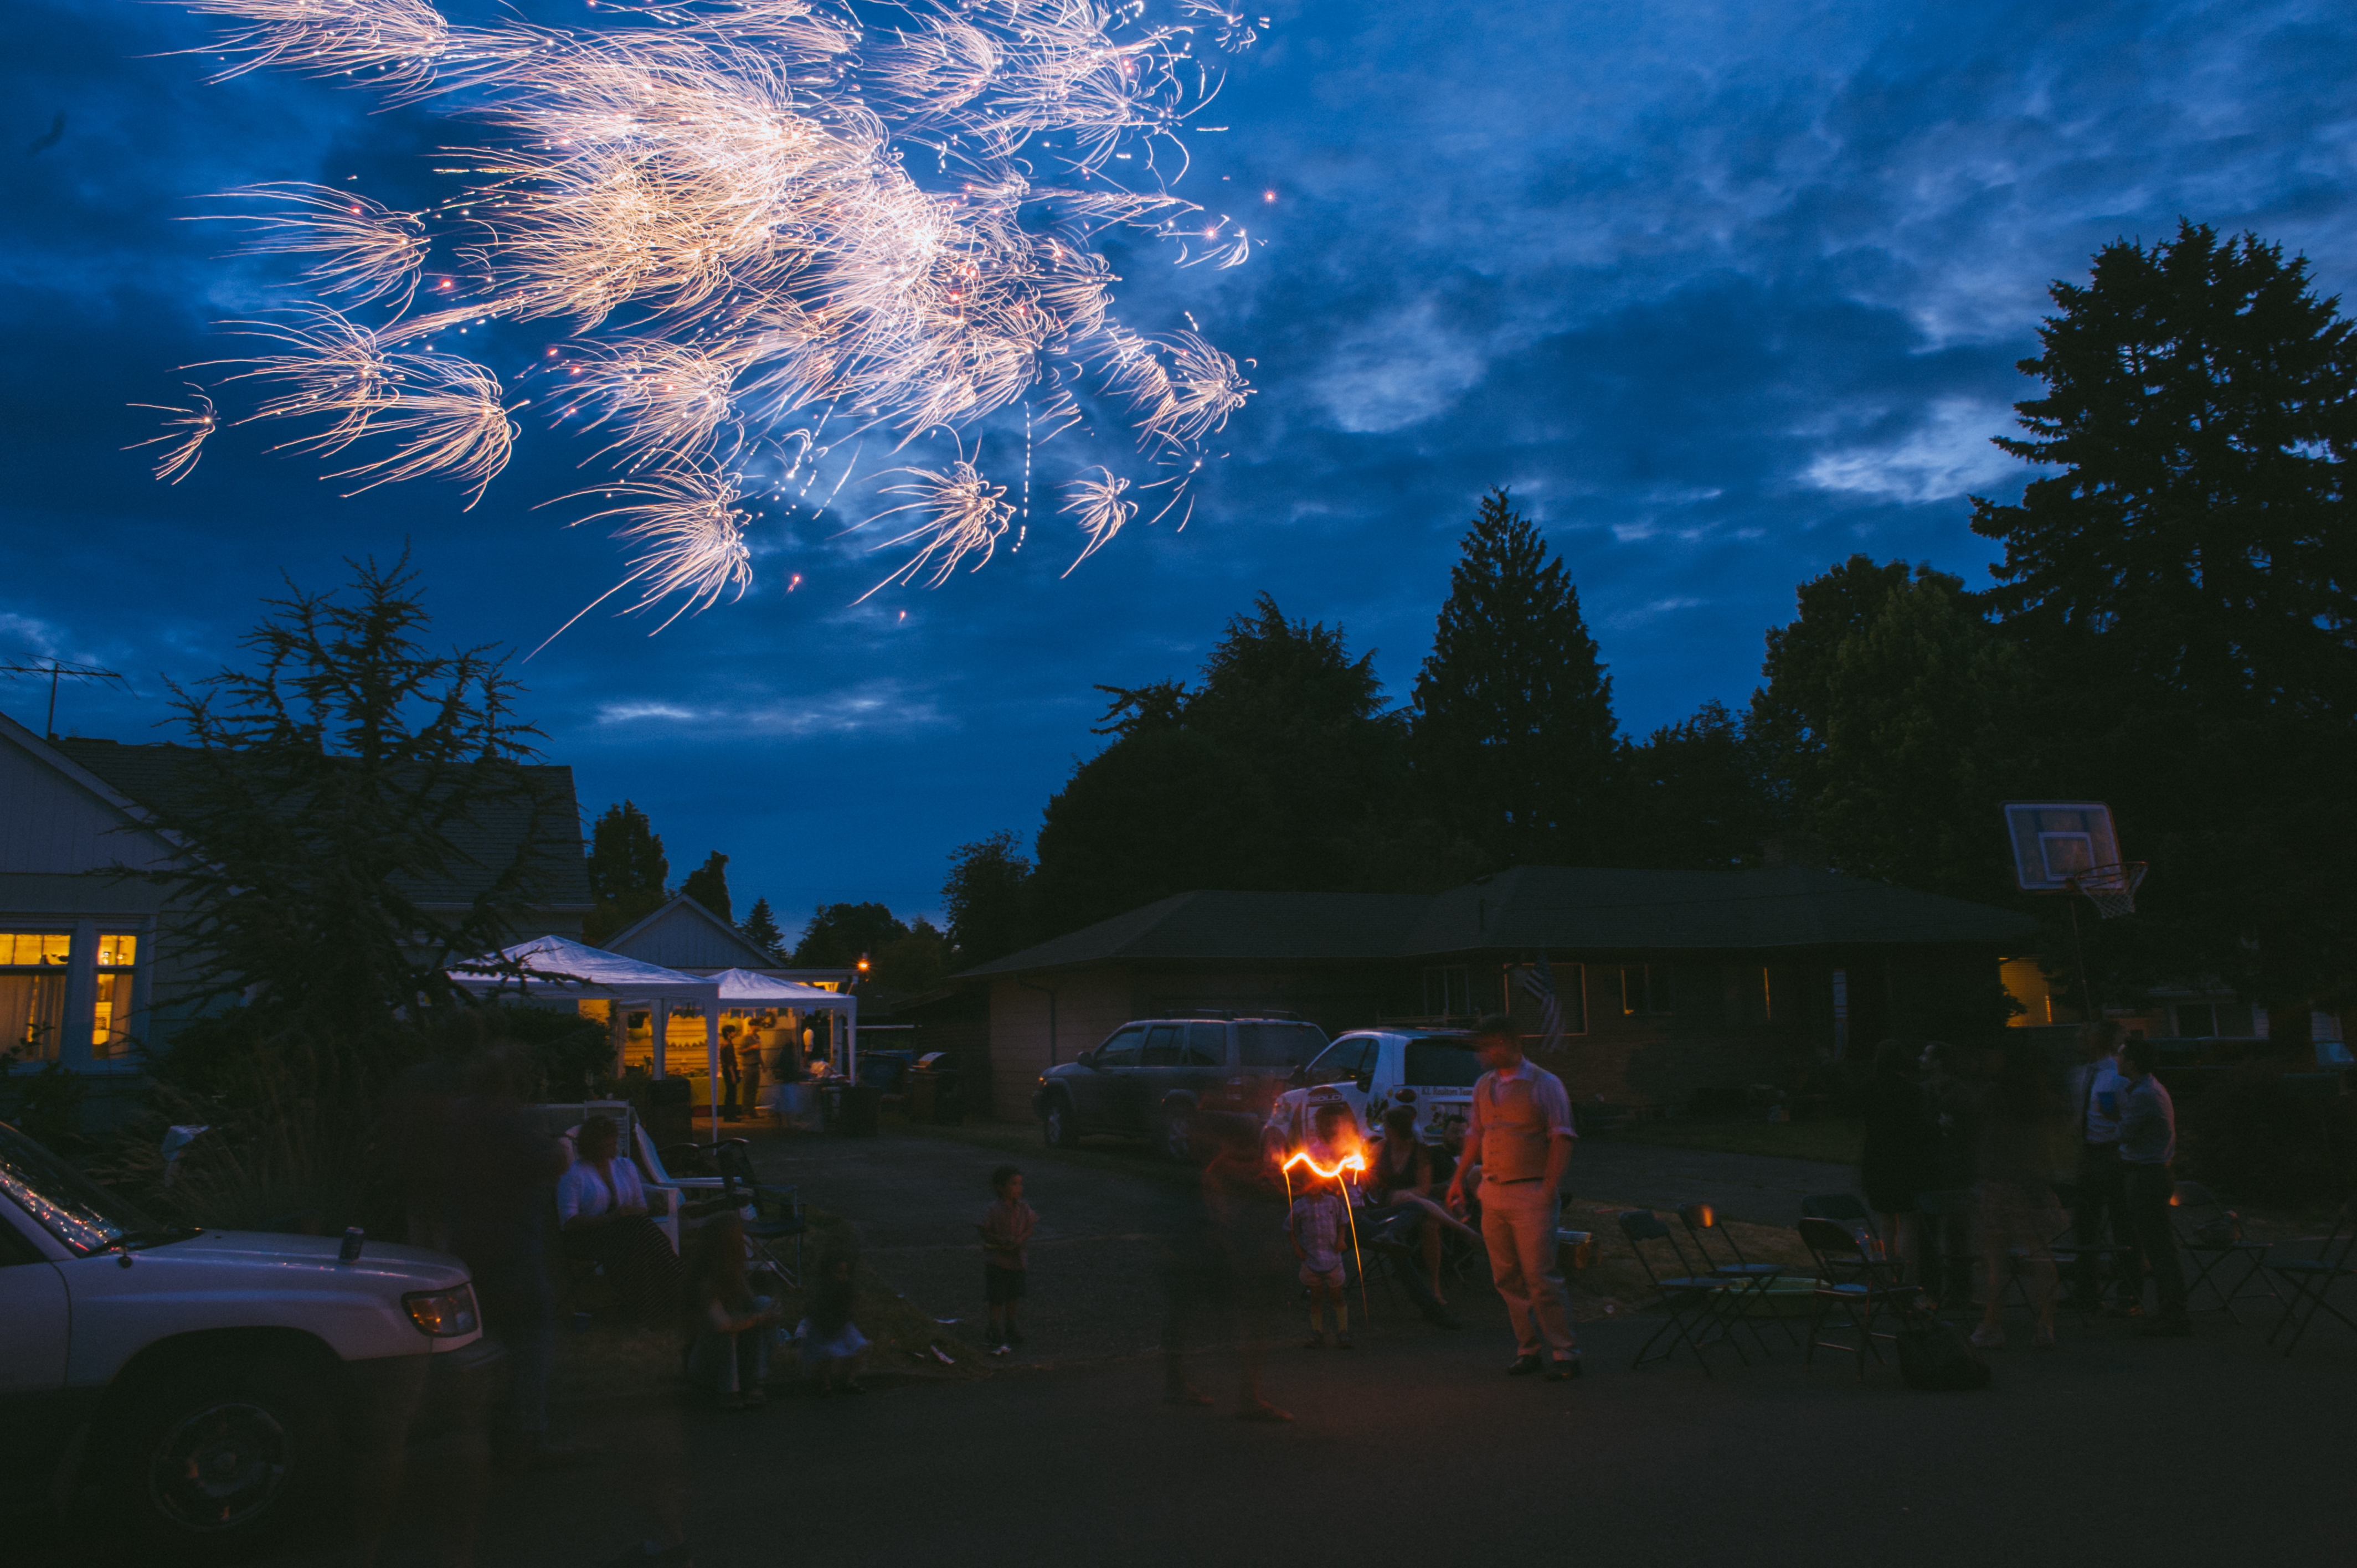 wedding guests sit in the yard while fireworks go off in the sky